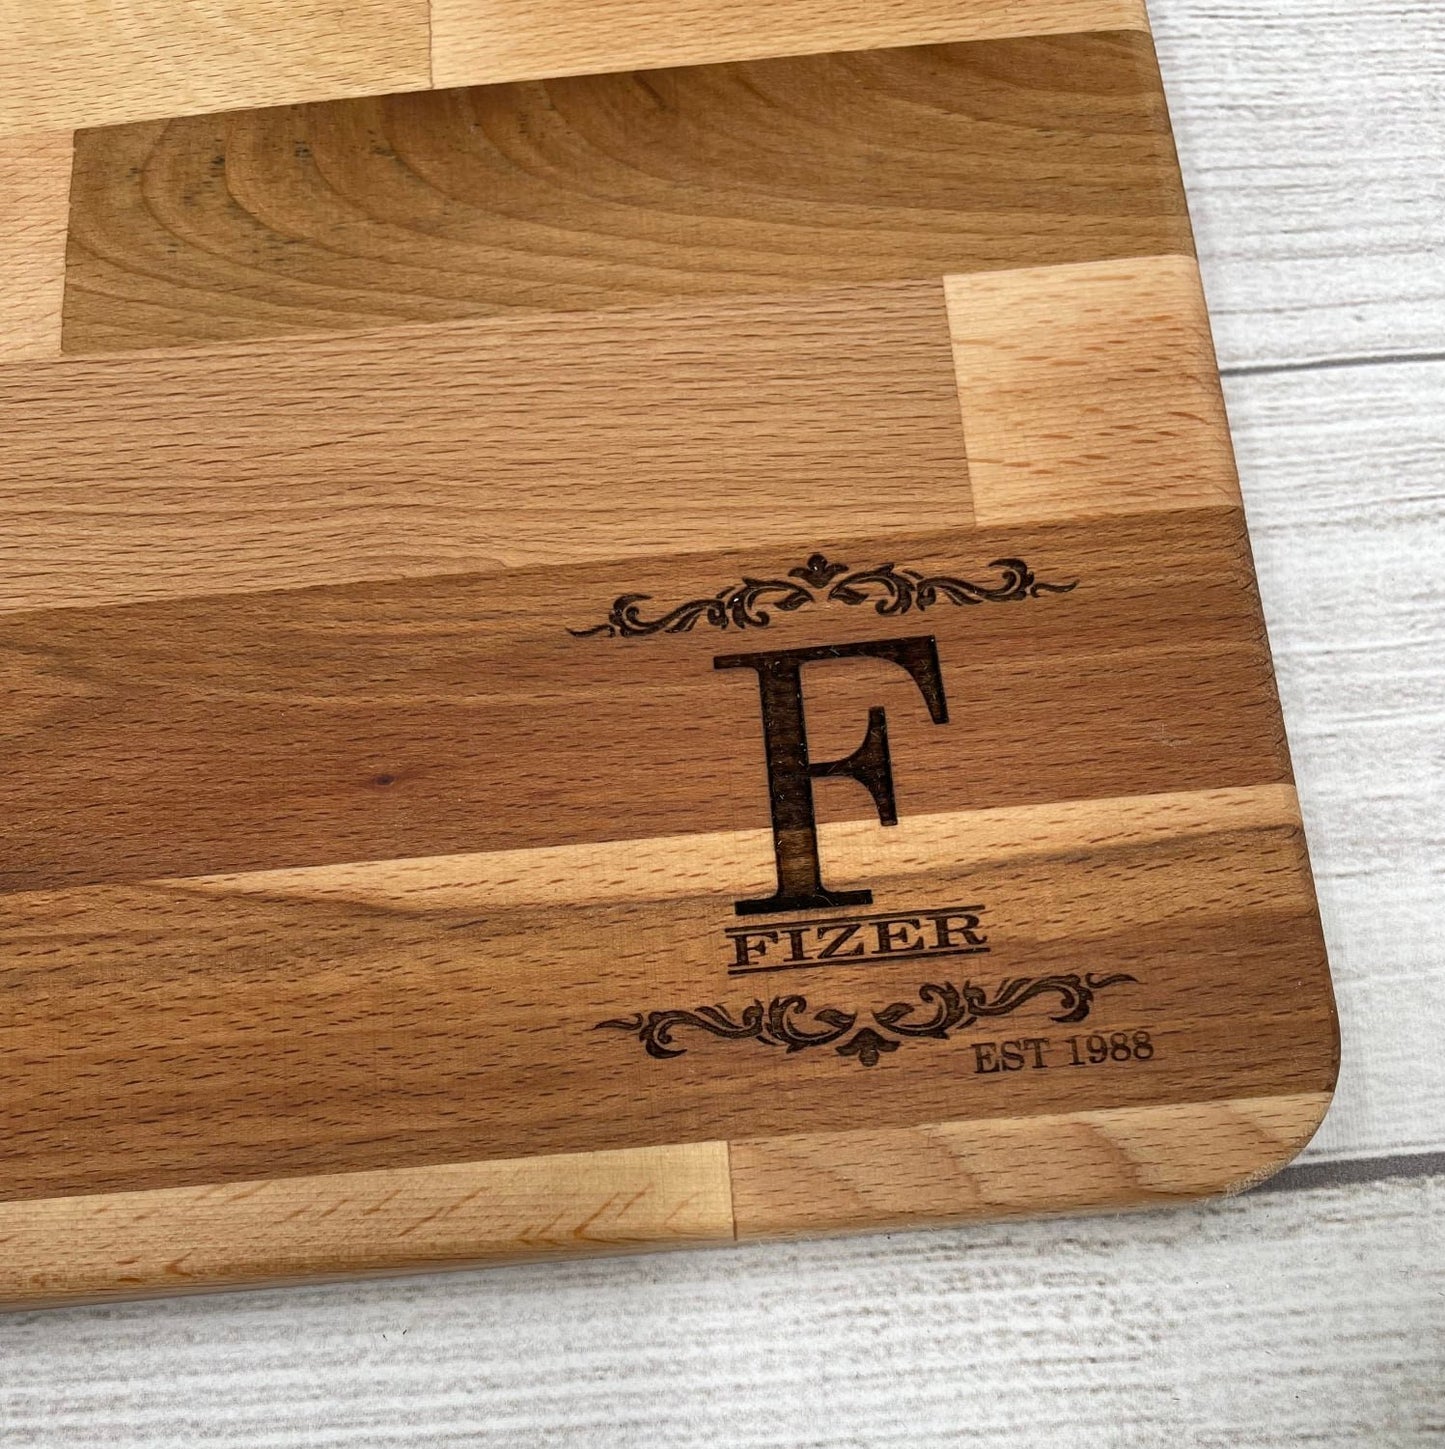 Cutting Board Monogram Personalized Mother's Day Gift